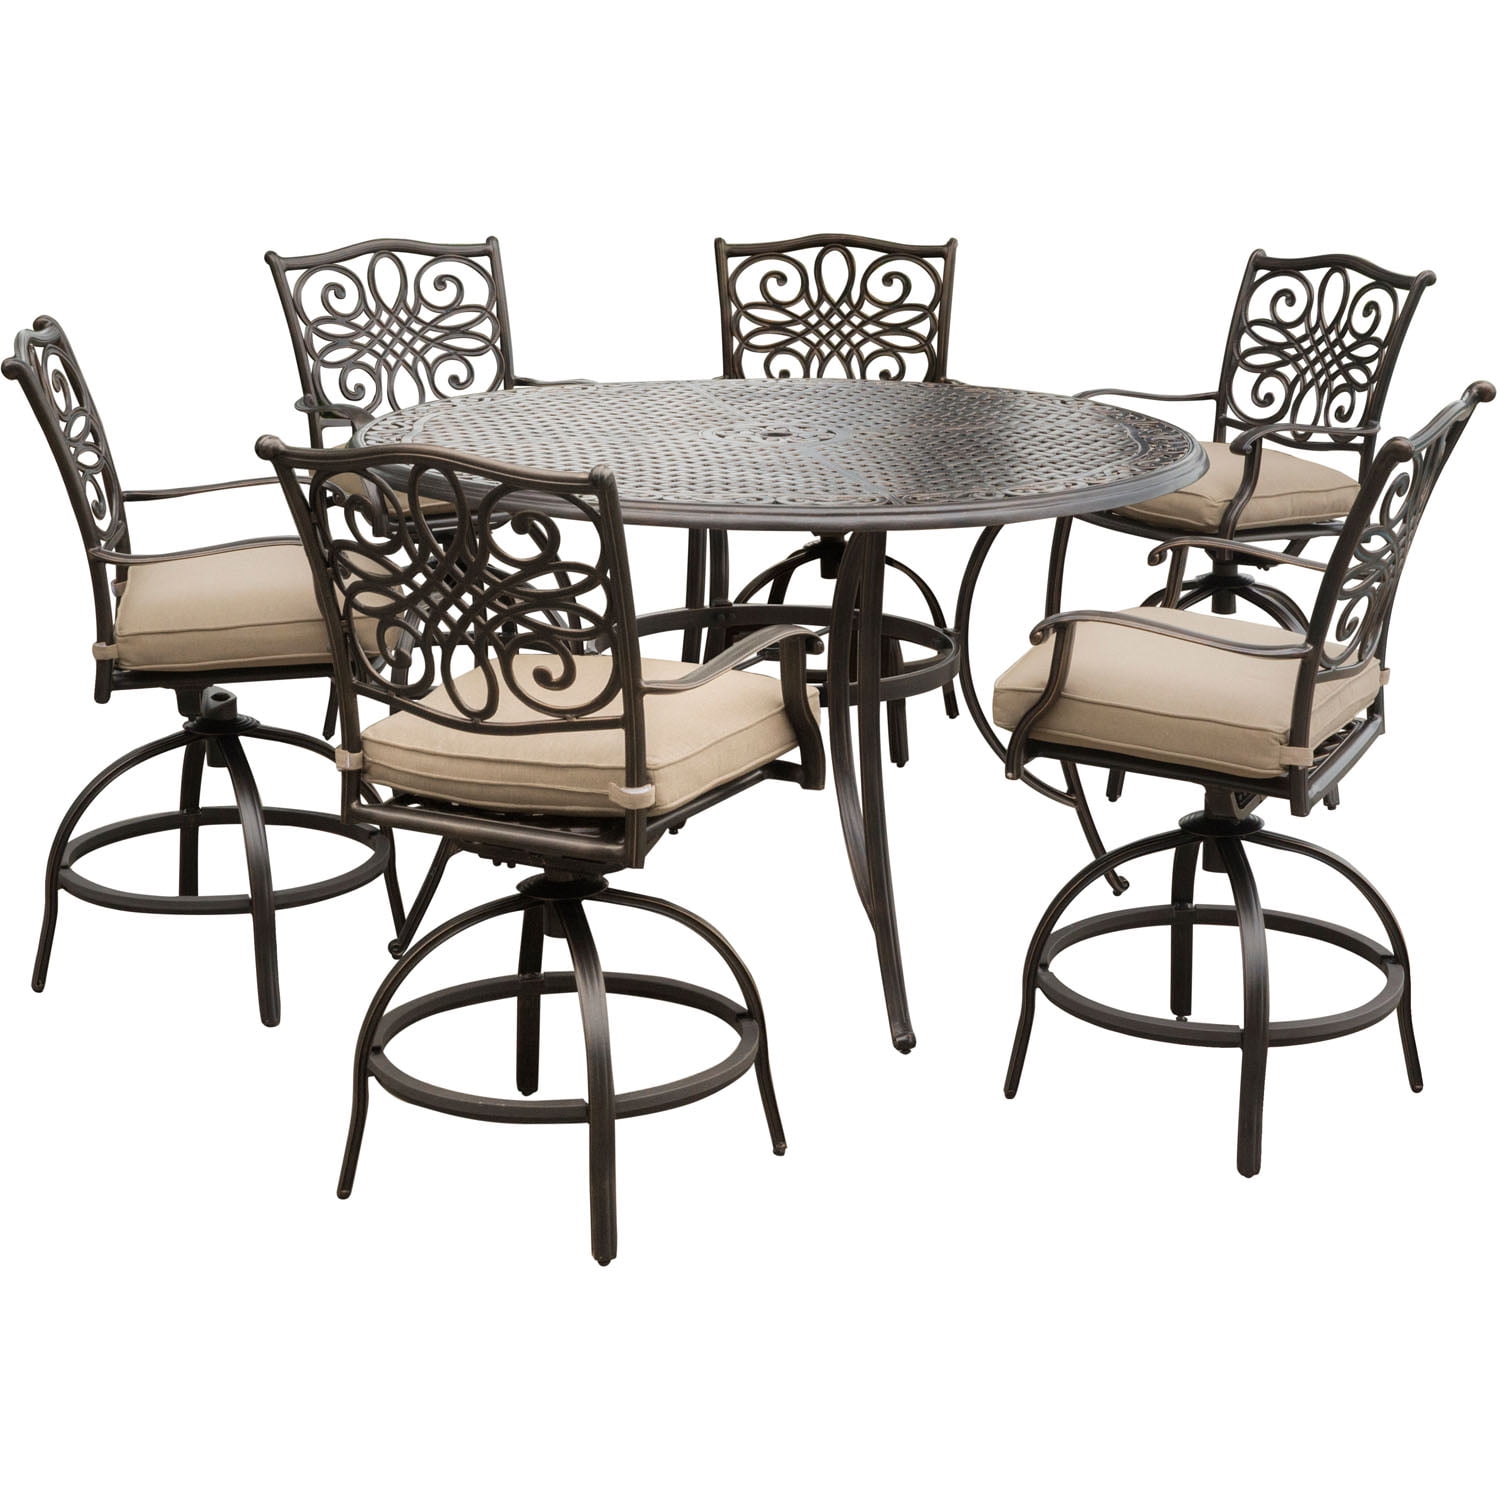 Hanover Traditions 7 Piece High Dining, Round Dining Room Table With Swivel Chairs